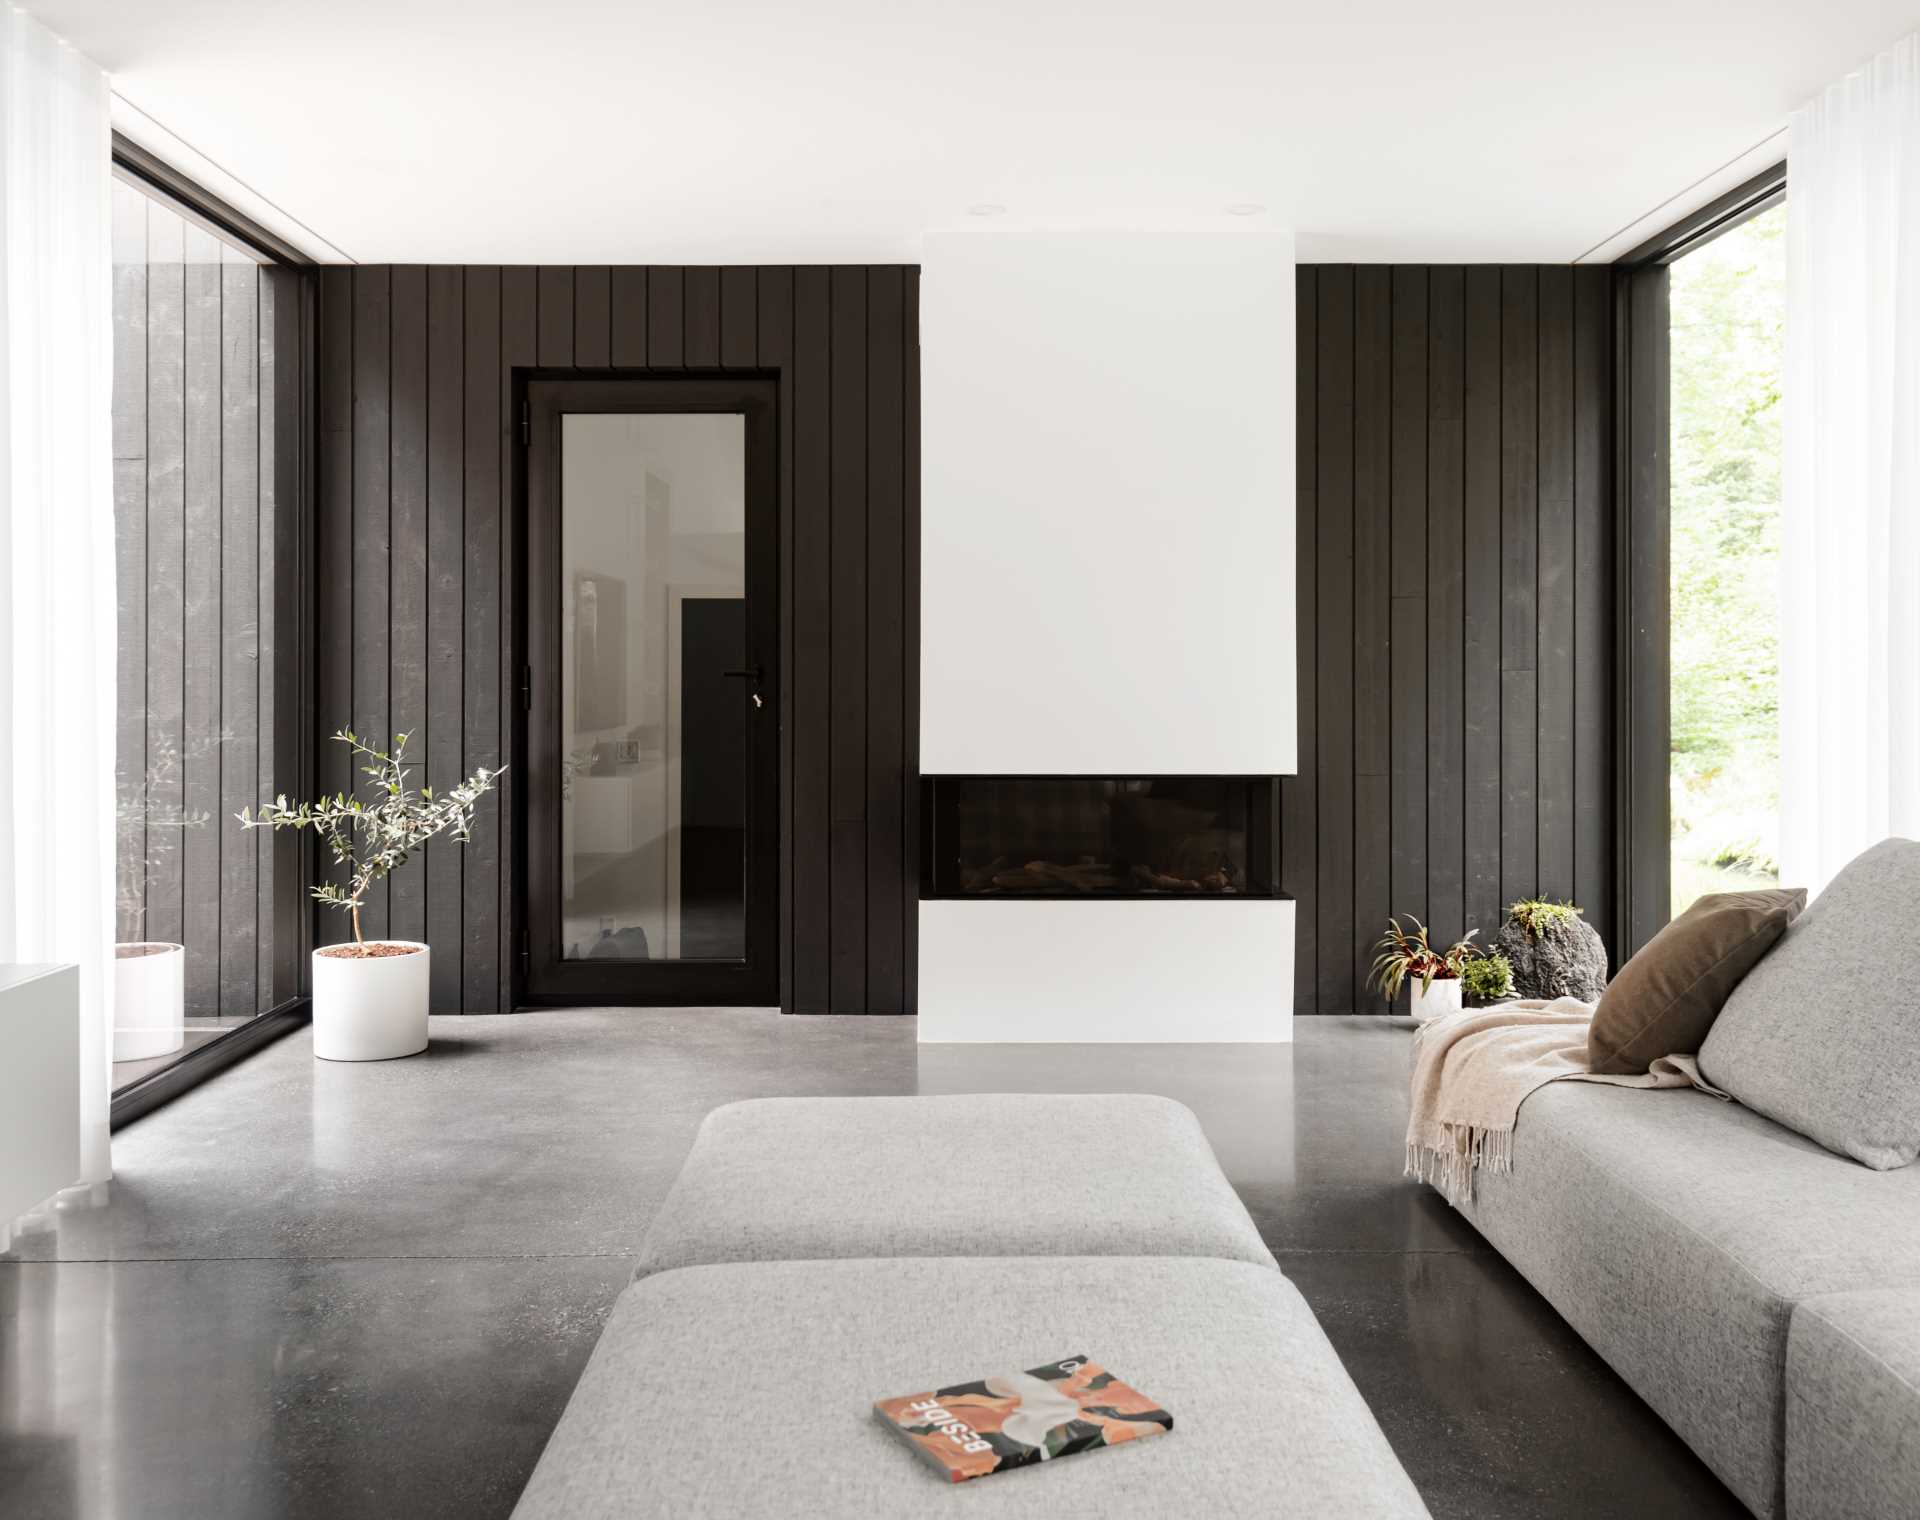 A modern home with polished concrete floors and black-framed picture windows.